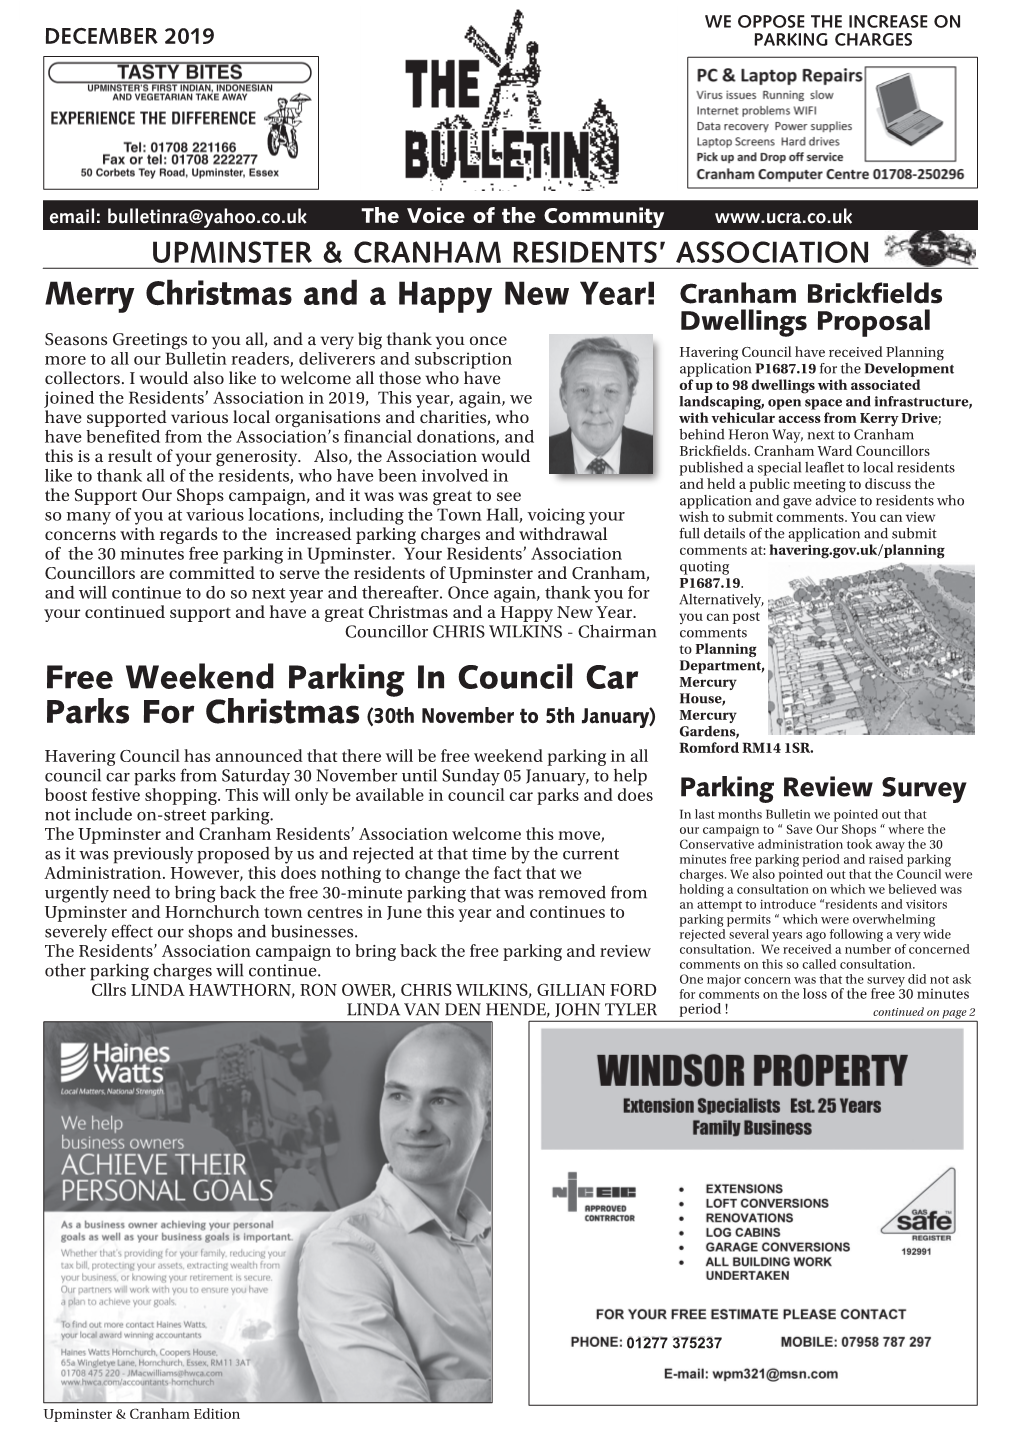 Merry Christmas and a Happy New Year! Free Weekend Parking In